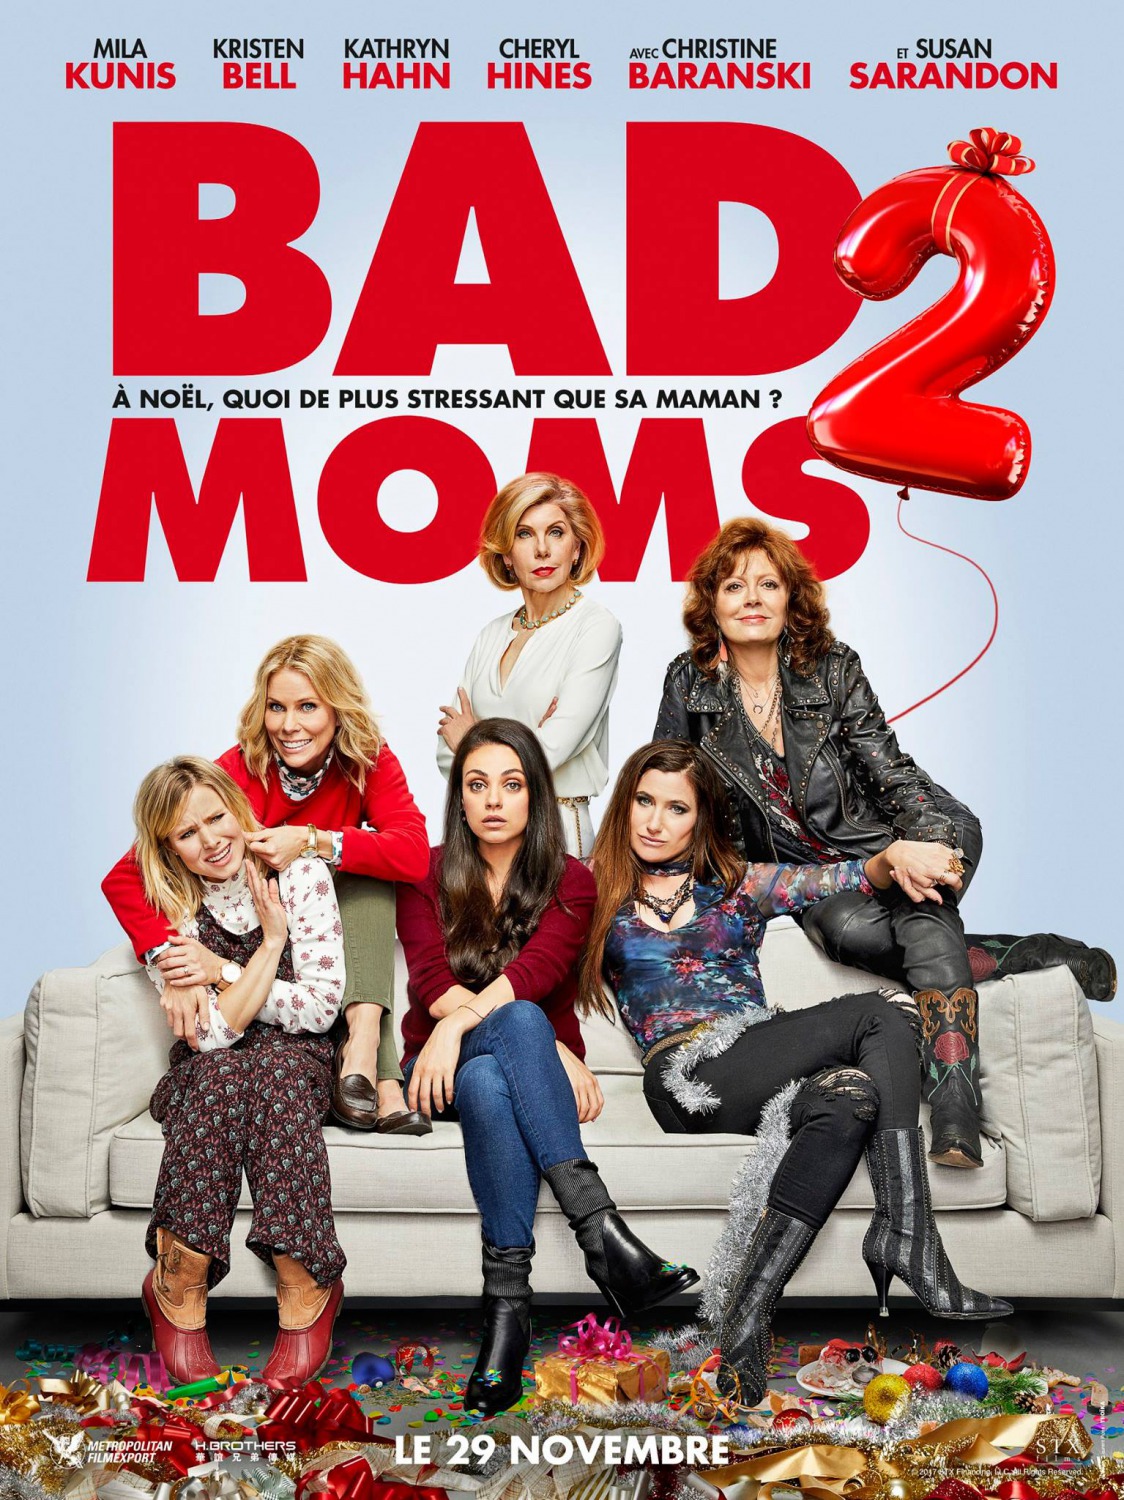 Extra Large Movie Poster Image for A Bad Moms Christmas (#9 of 10)